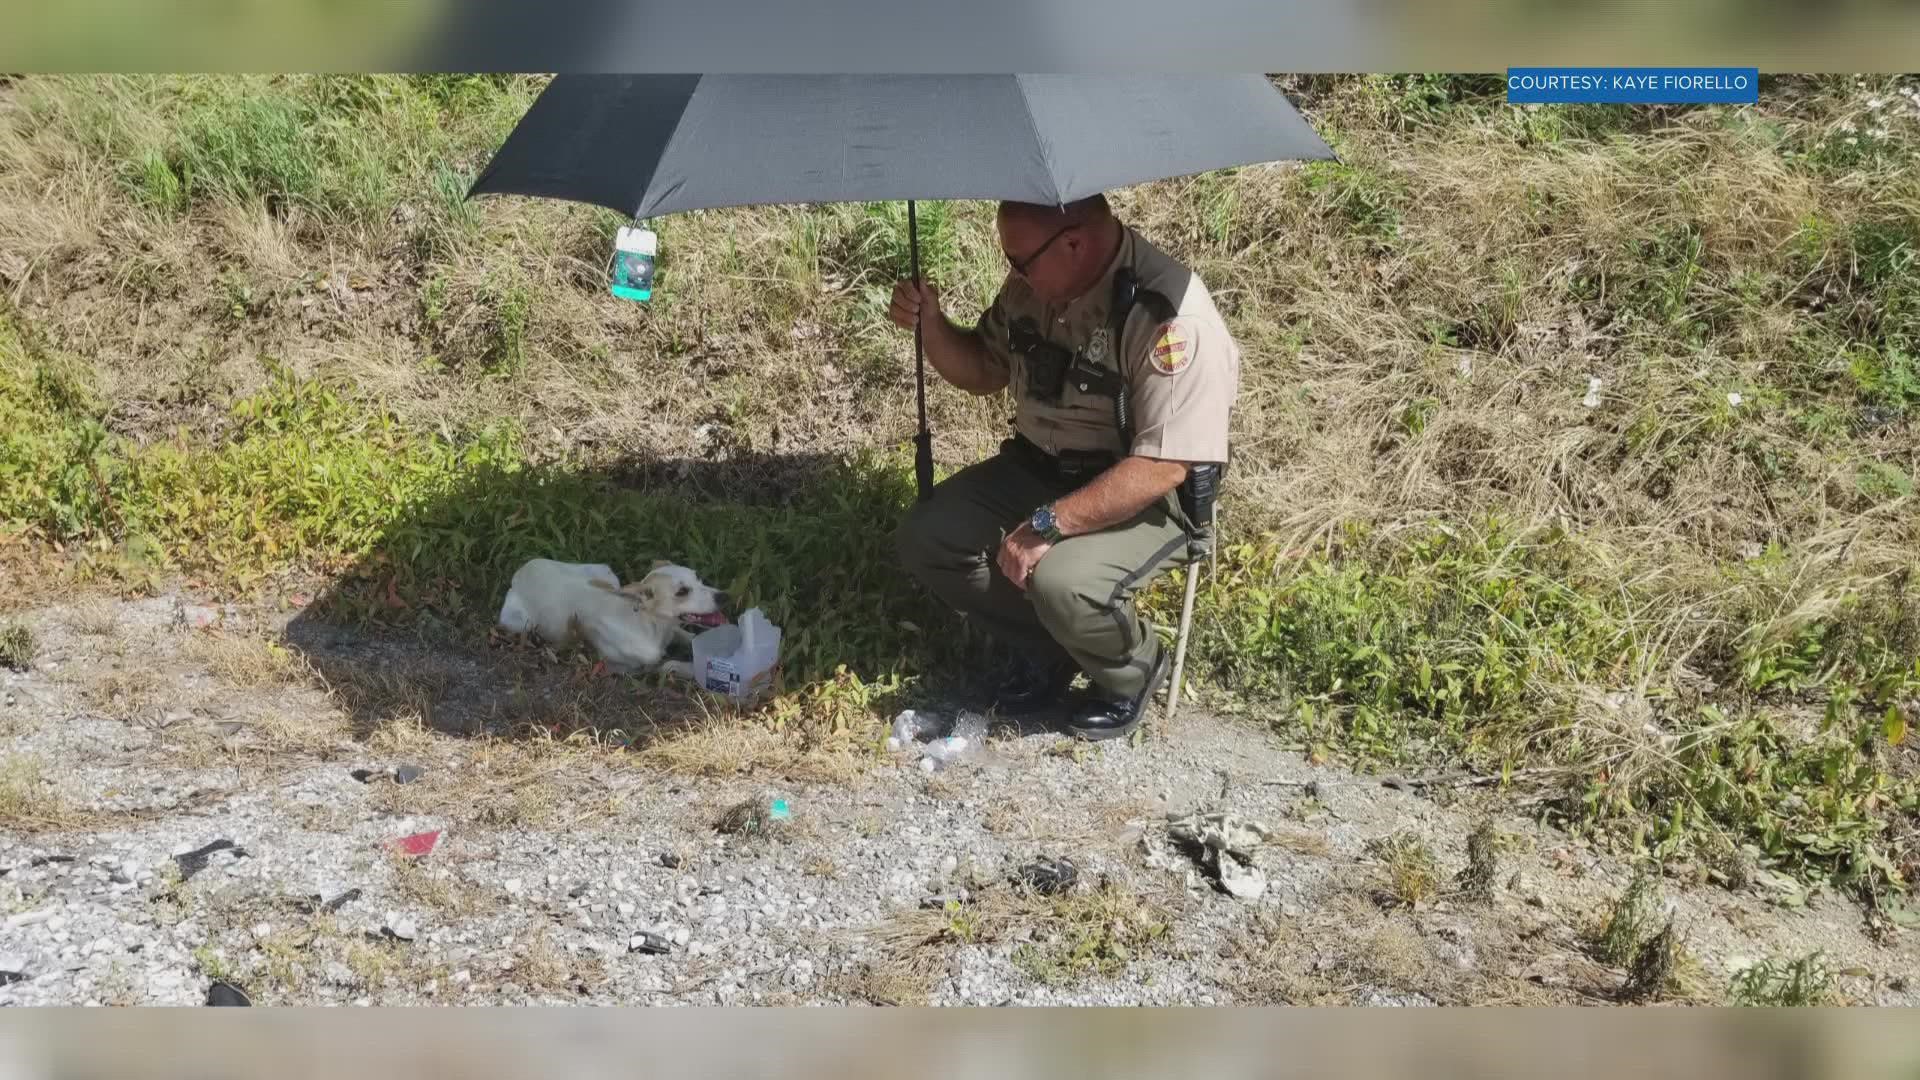 The trooper gave the dog water and Little Debbie cakes, using an umbrella for shade.